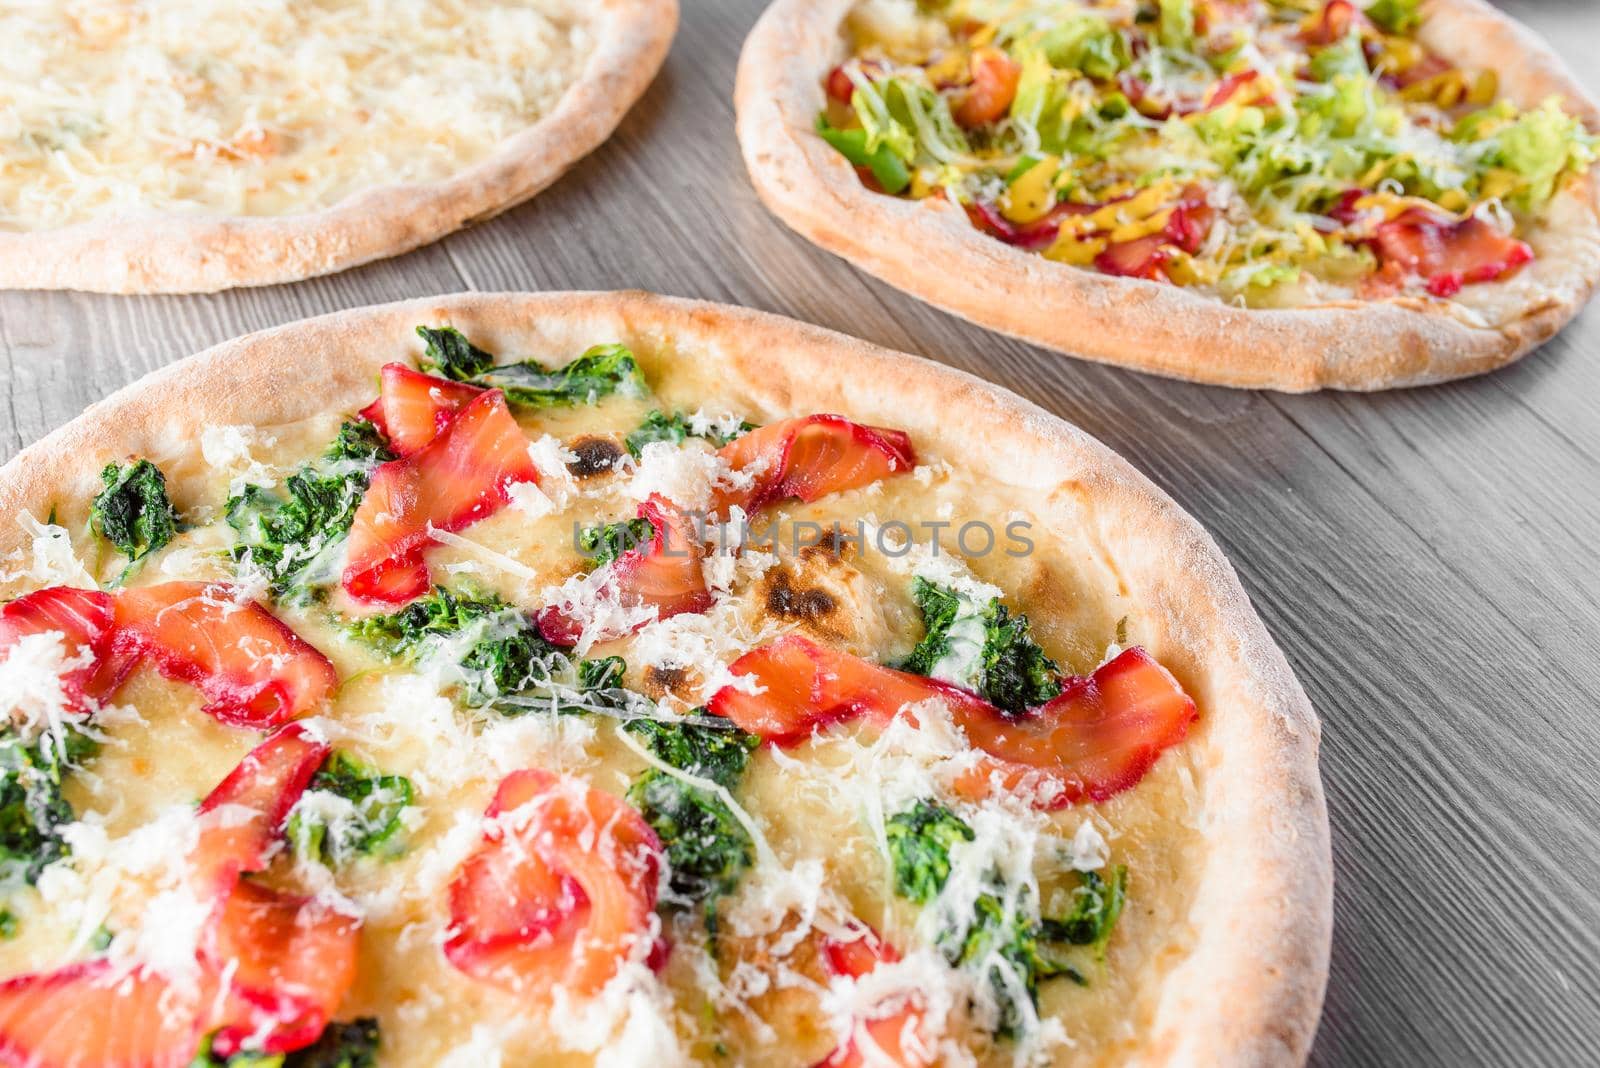 Assortment of pizza with red fish, spinach, parmesan cheese, mozzarella, lettuce, ham, four cheeses on wooden boards.